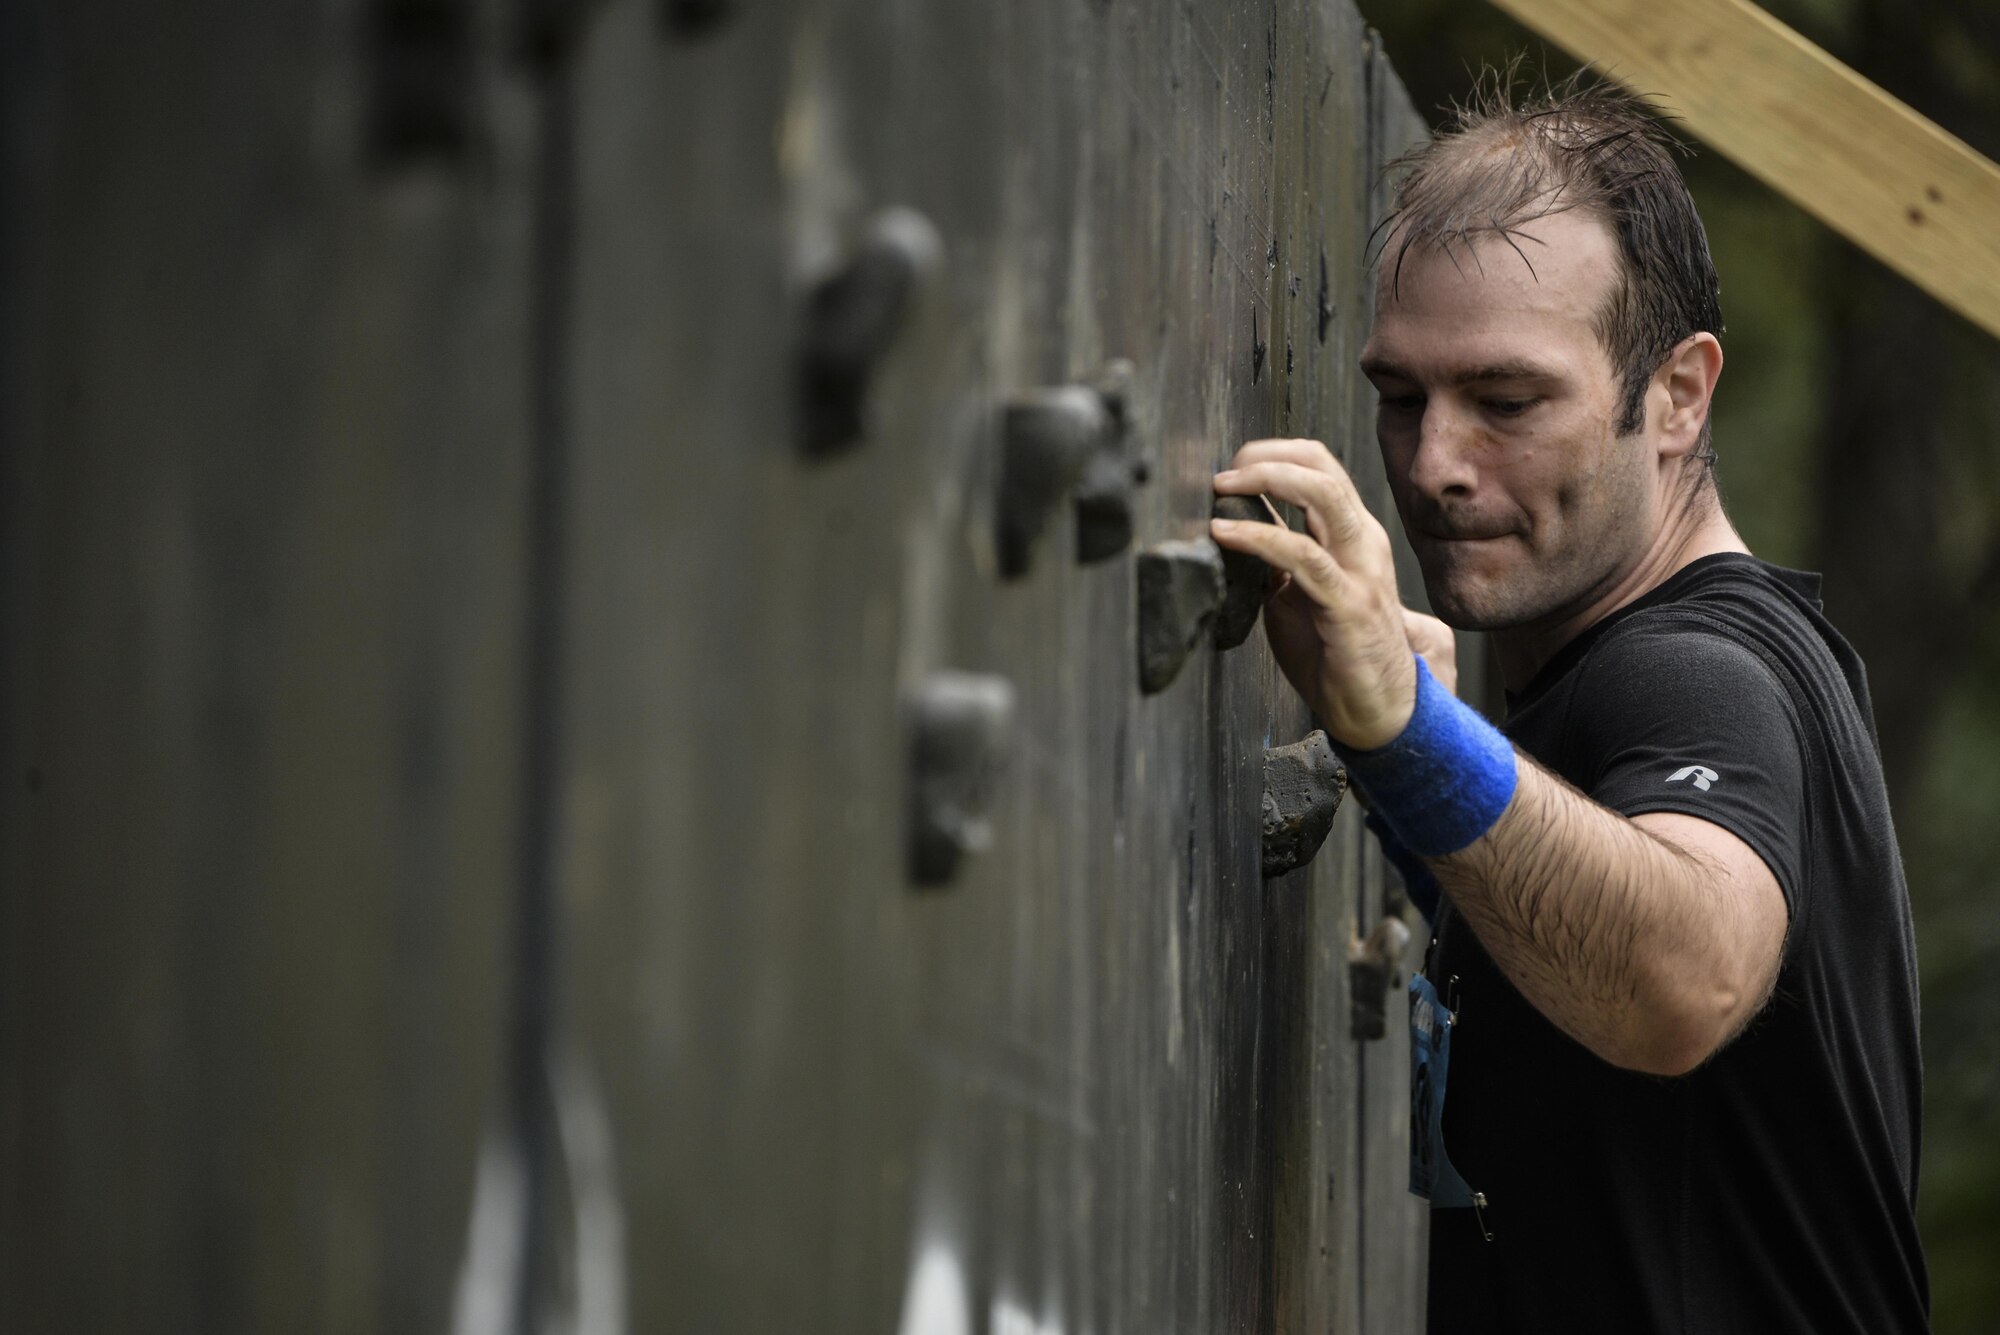 Staff Sgt. Bradley, 29th Intelligence Squadron, maneuvers through a rock climbing wall with only a one-inch gap along a 25-foot wall during the 2016 Savage Race October 8, 2016 at Kennedyville, Md. 70th ISRW participants endured a seven-mile obstacle course of cargo net walls, creeks, ice cold water and climbing to test their stamina and strength as a team. (U.S. Air Force photo/Staff Sgt. Alexandre Montes)